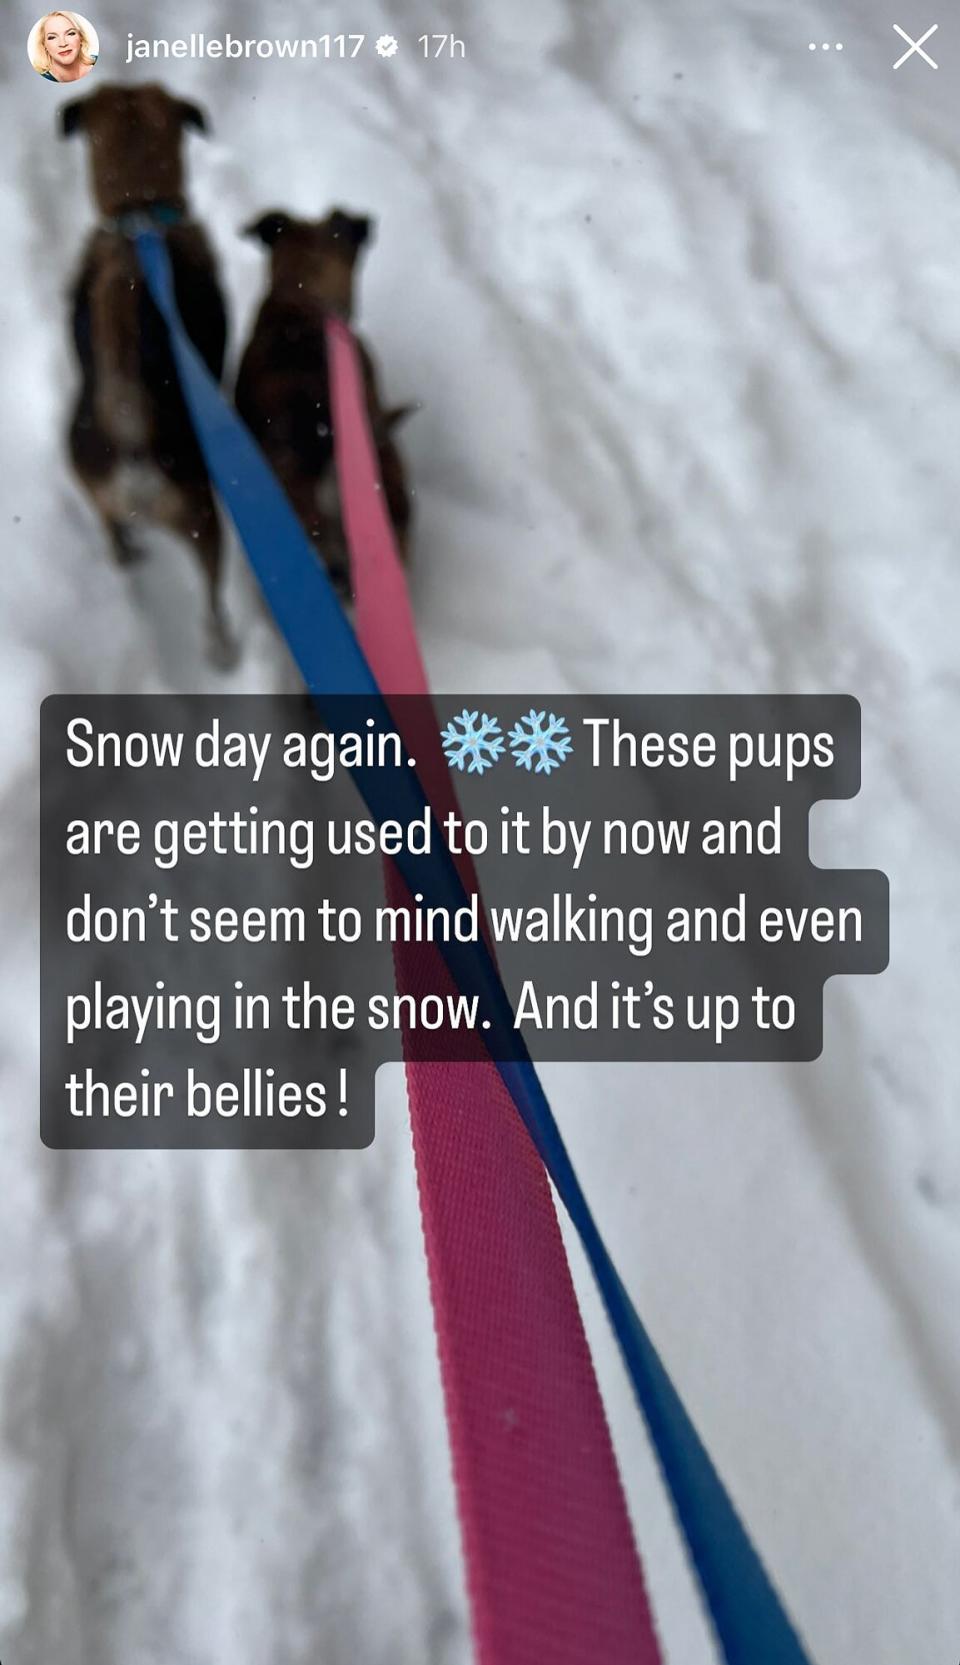 Sister Wives Stars Janelle, Meri and Gwendlyn Brown Share Peeks Inside Their March Snow Day